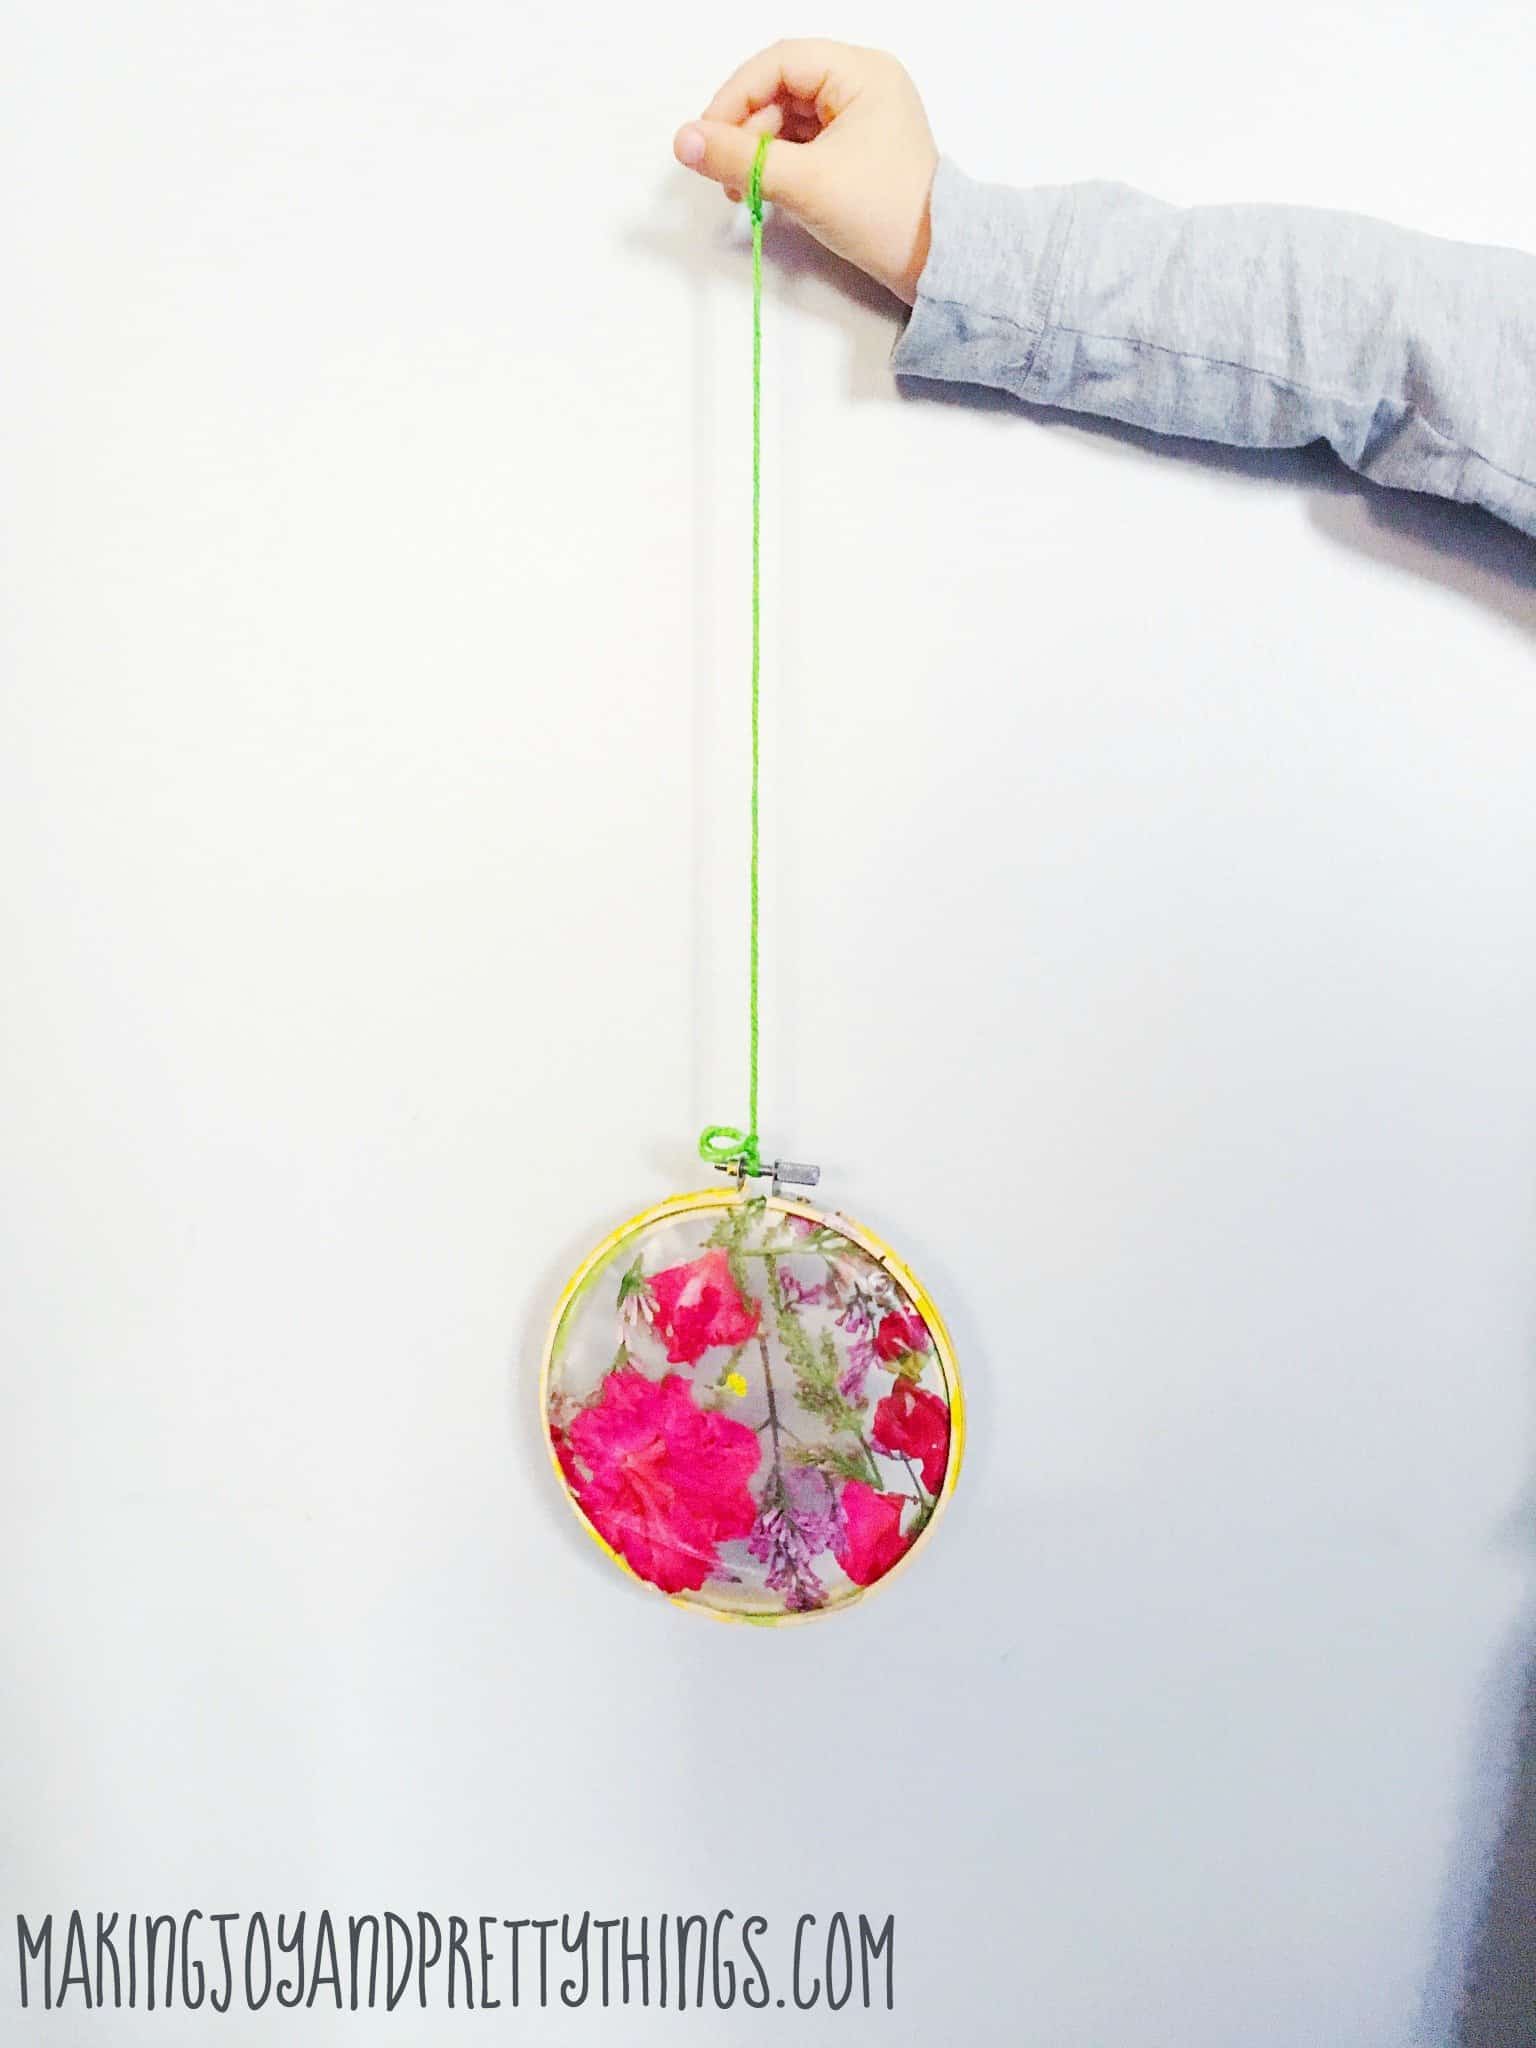 A little boy's arm holds a long piece of green yarn. Hanging on the yarn is a pressed flower suncatcher, made with a yellow-painted embroidery hoop and pink and purple flower petals pressed in contact paper.